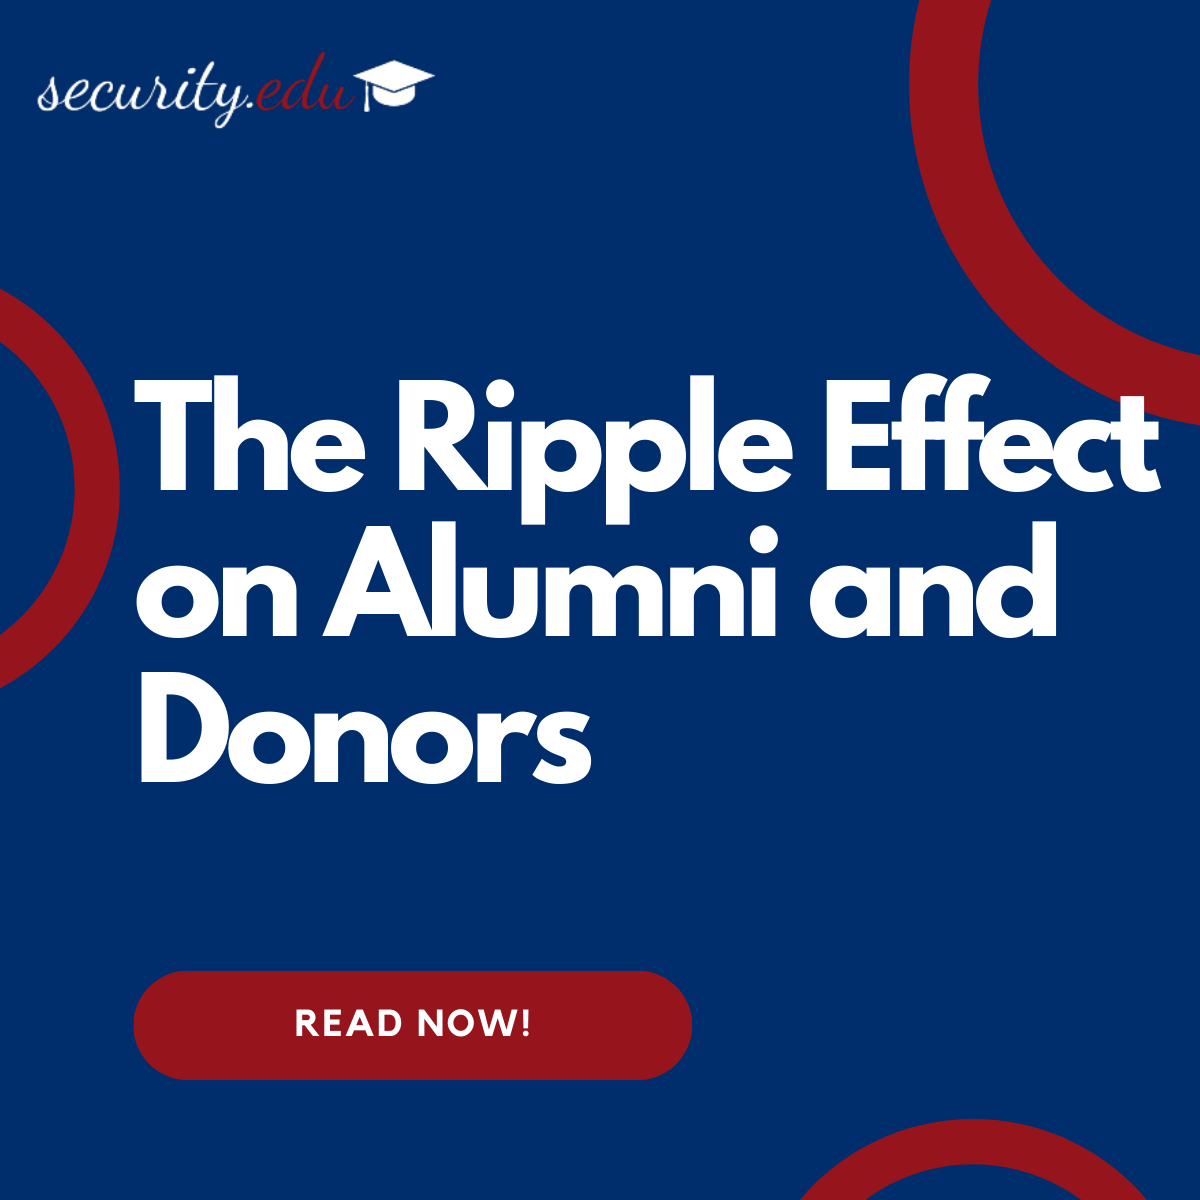 The Ripple Effect of Cybersecurity Breaches on Alumni and Donors